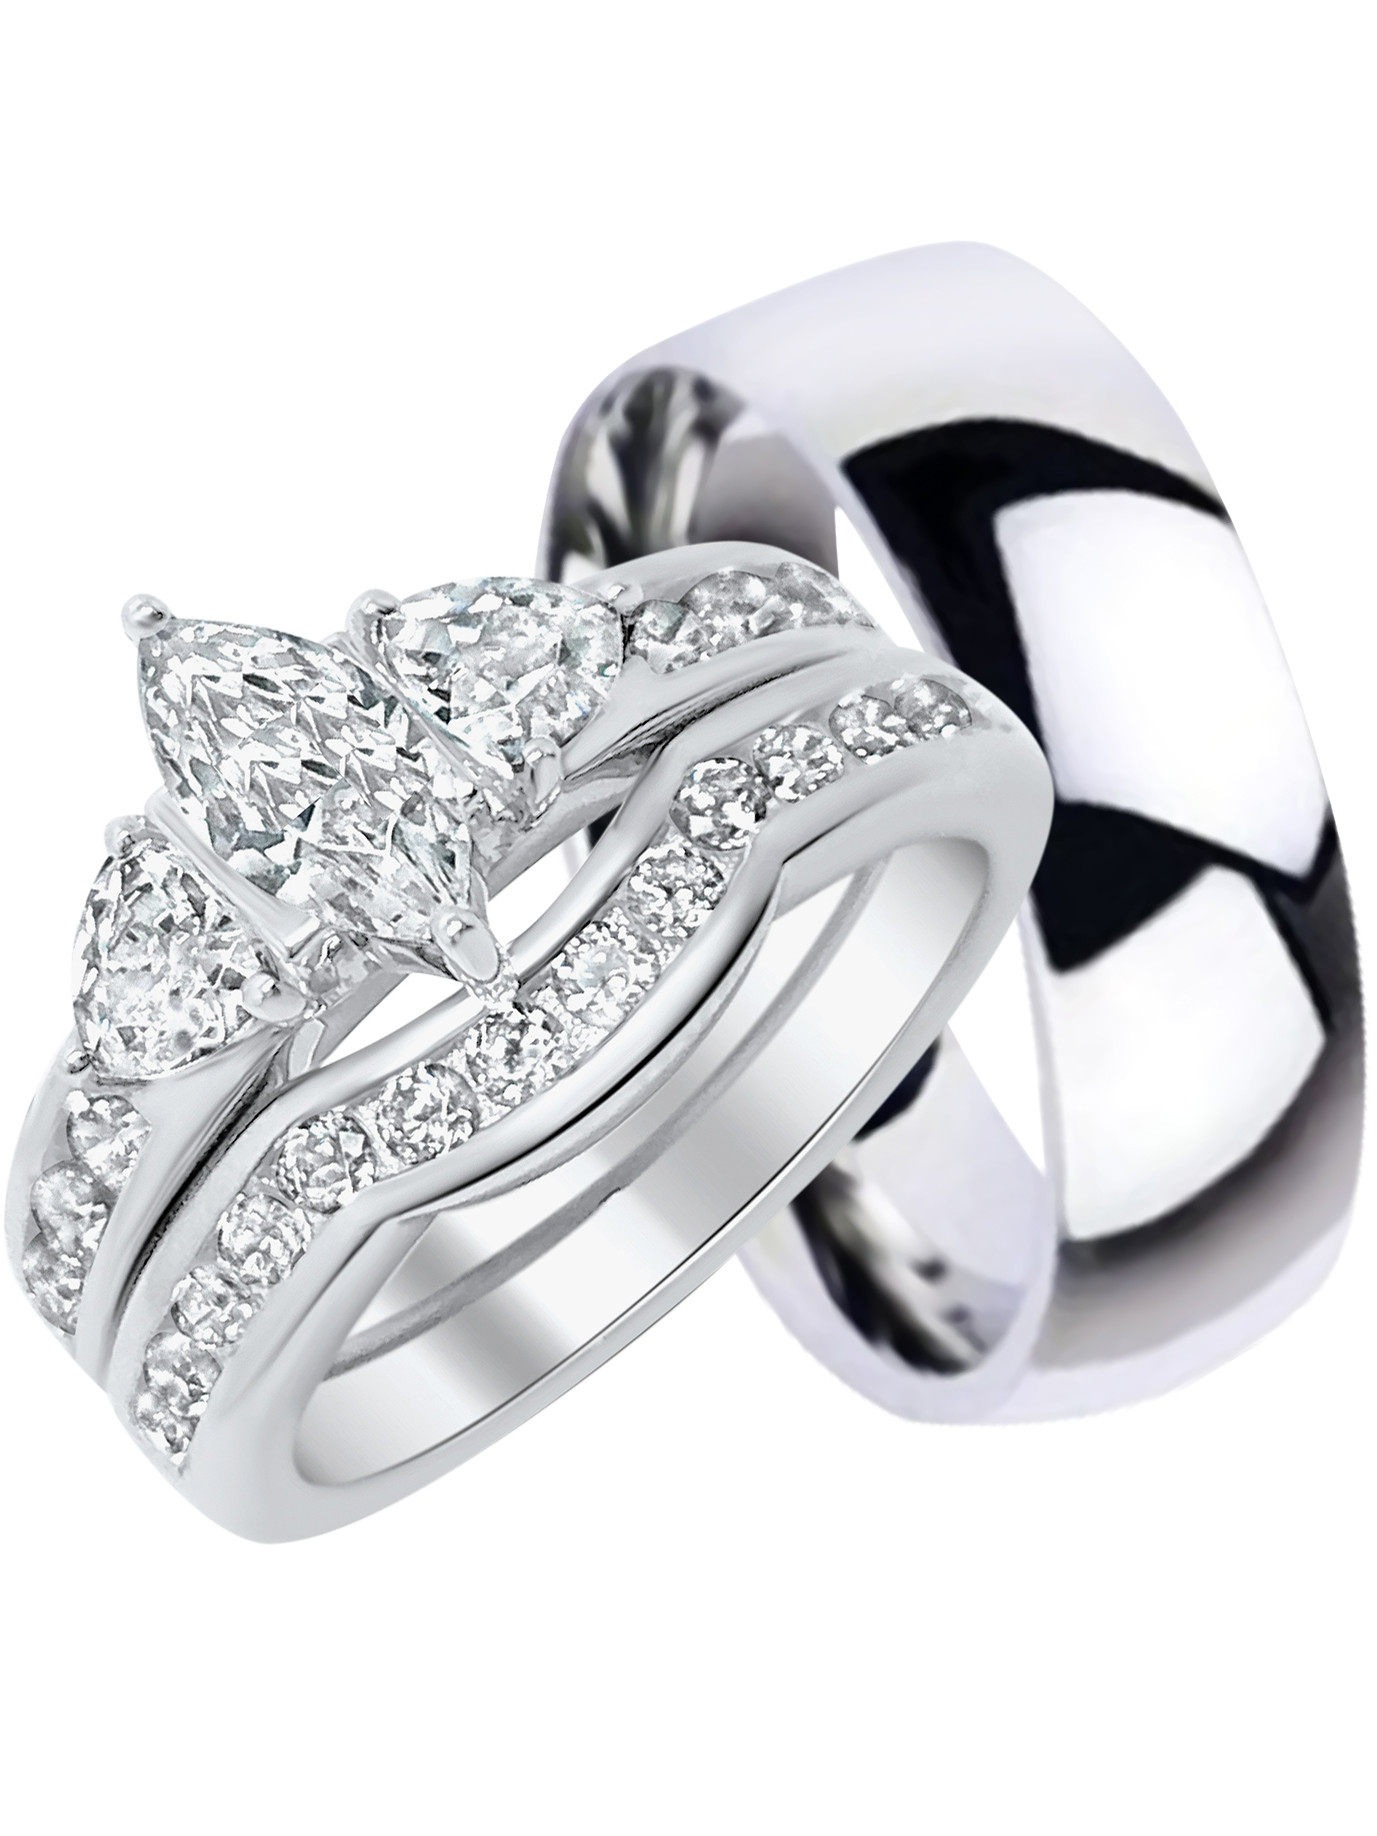 Silver Wedding Rings For Him
 His and Hers Wedding Ring Set Matching Trio Wedding Bands